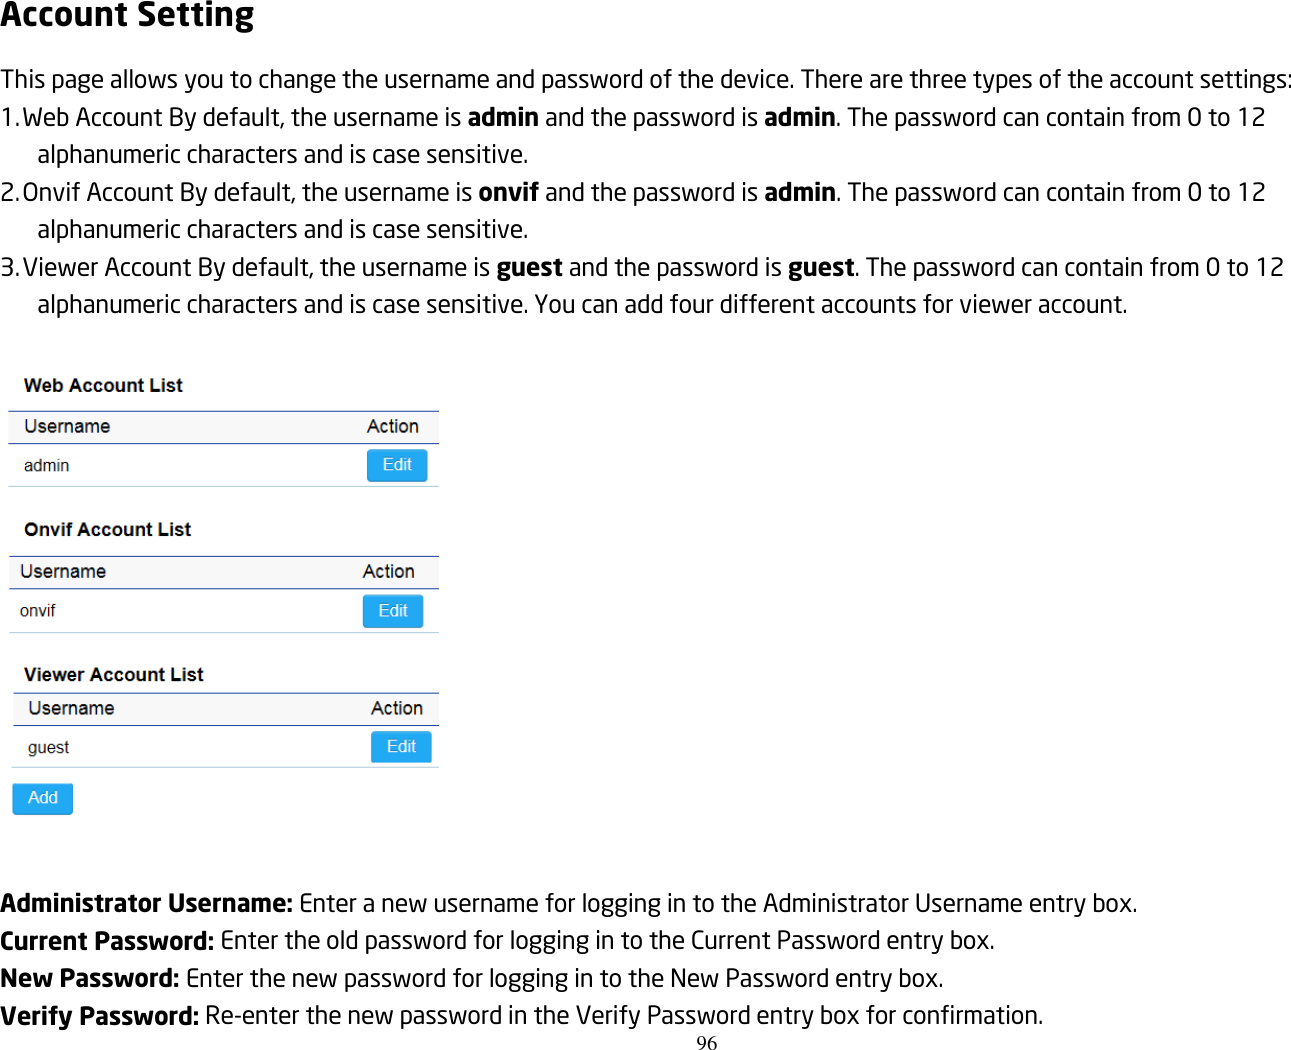 96  Account Setting This page allows you to change the username and password of the device. There are three types of the account settings: 1. Web Account By default, the username is admin and the password is admin. The password can contain from 0 to 12 alphanumeric characters and is case sensitive. 2. Onvif Account By default, the username is onvif and the password is admin. The password can contain from 0 to 12 alphanumeric characters and is case sensitive. 3. Viewer Account By default, the username is guest and the password is guest. The password can contain from 0 to 12 alphanumeric characters and is case sensitive. You can add four different accounts for viewer account.    Administrator Username: Enter a new username for logging in to the Administrator Username entry box. Current Password: Enter the old password for logging in to the Current Password entry box. New Password: Enter the new password for logging in to the New Password entry box. Verify Password: Re-enter the new password in the Verify Password entry box for confirmation. 